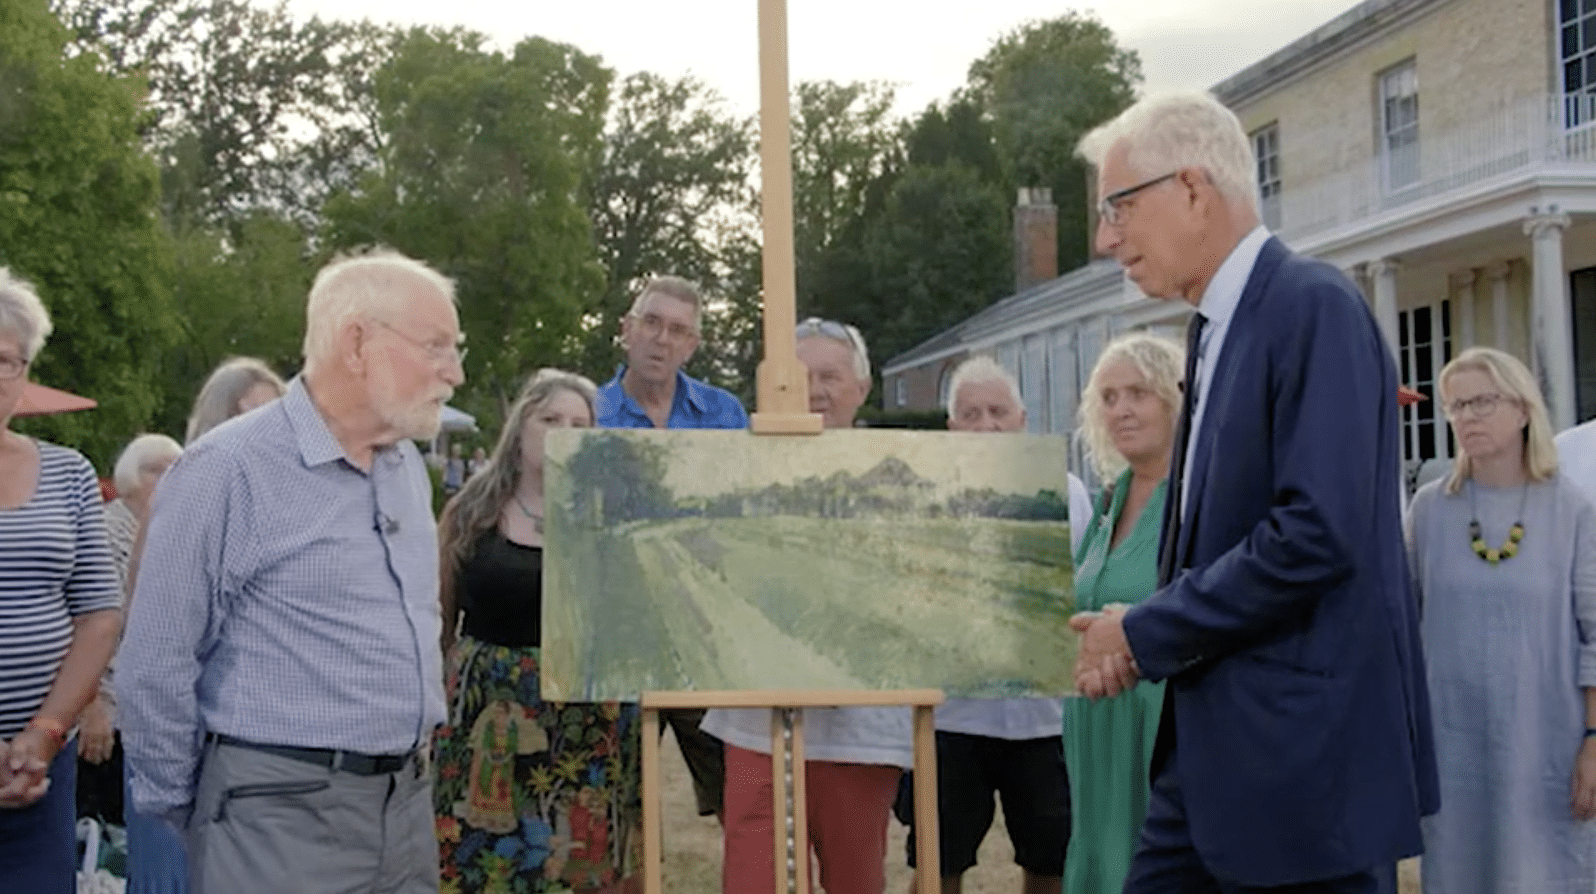 Old David Hockney Painting is Discovered at Antiques Roadshow